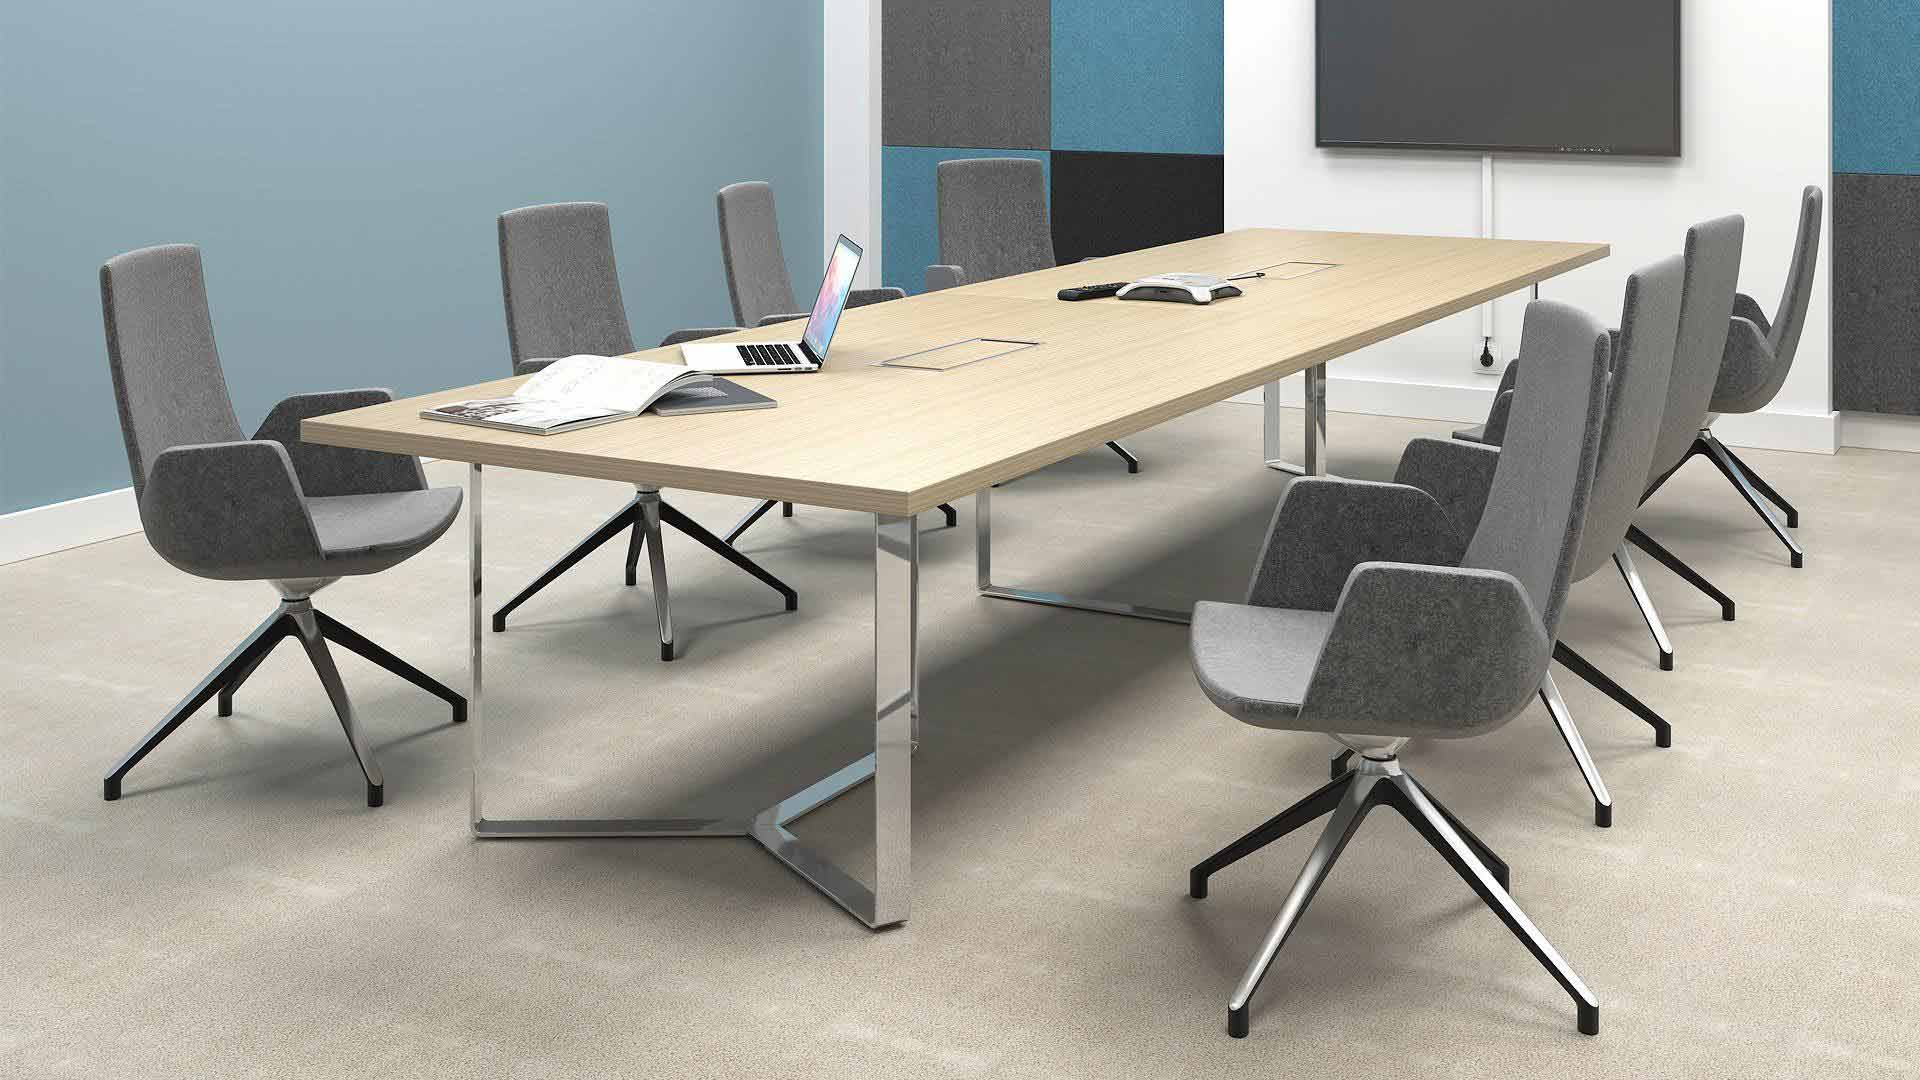 Plana Boardroom Table 4.2m long with Northcape chairs